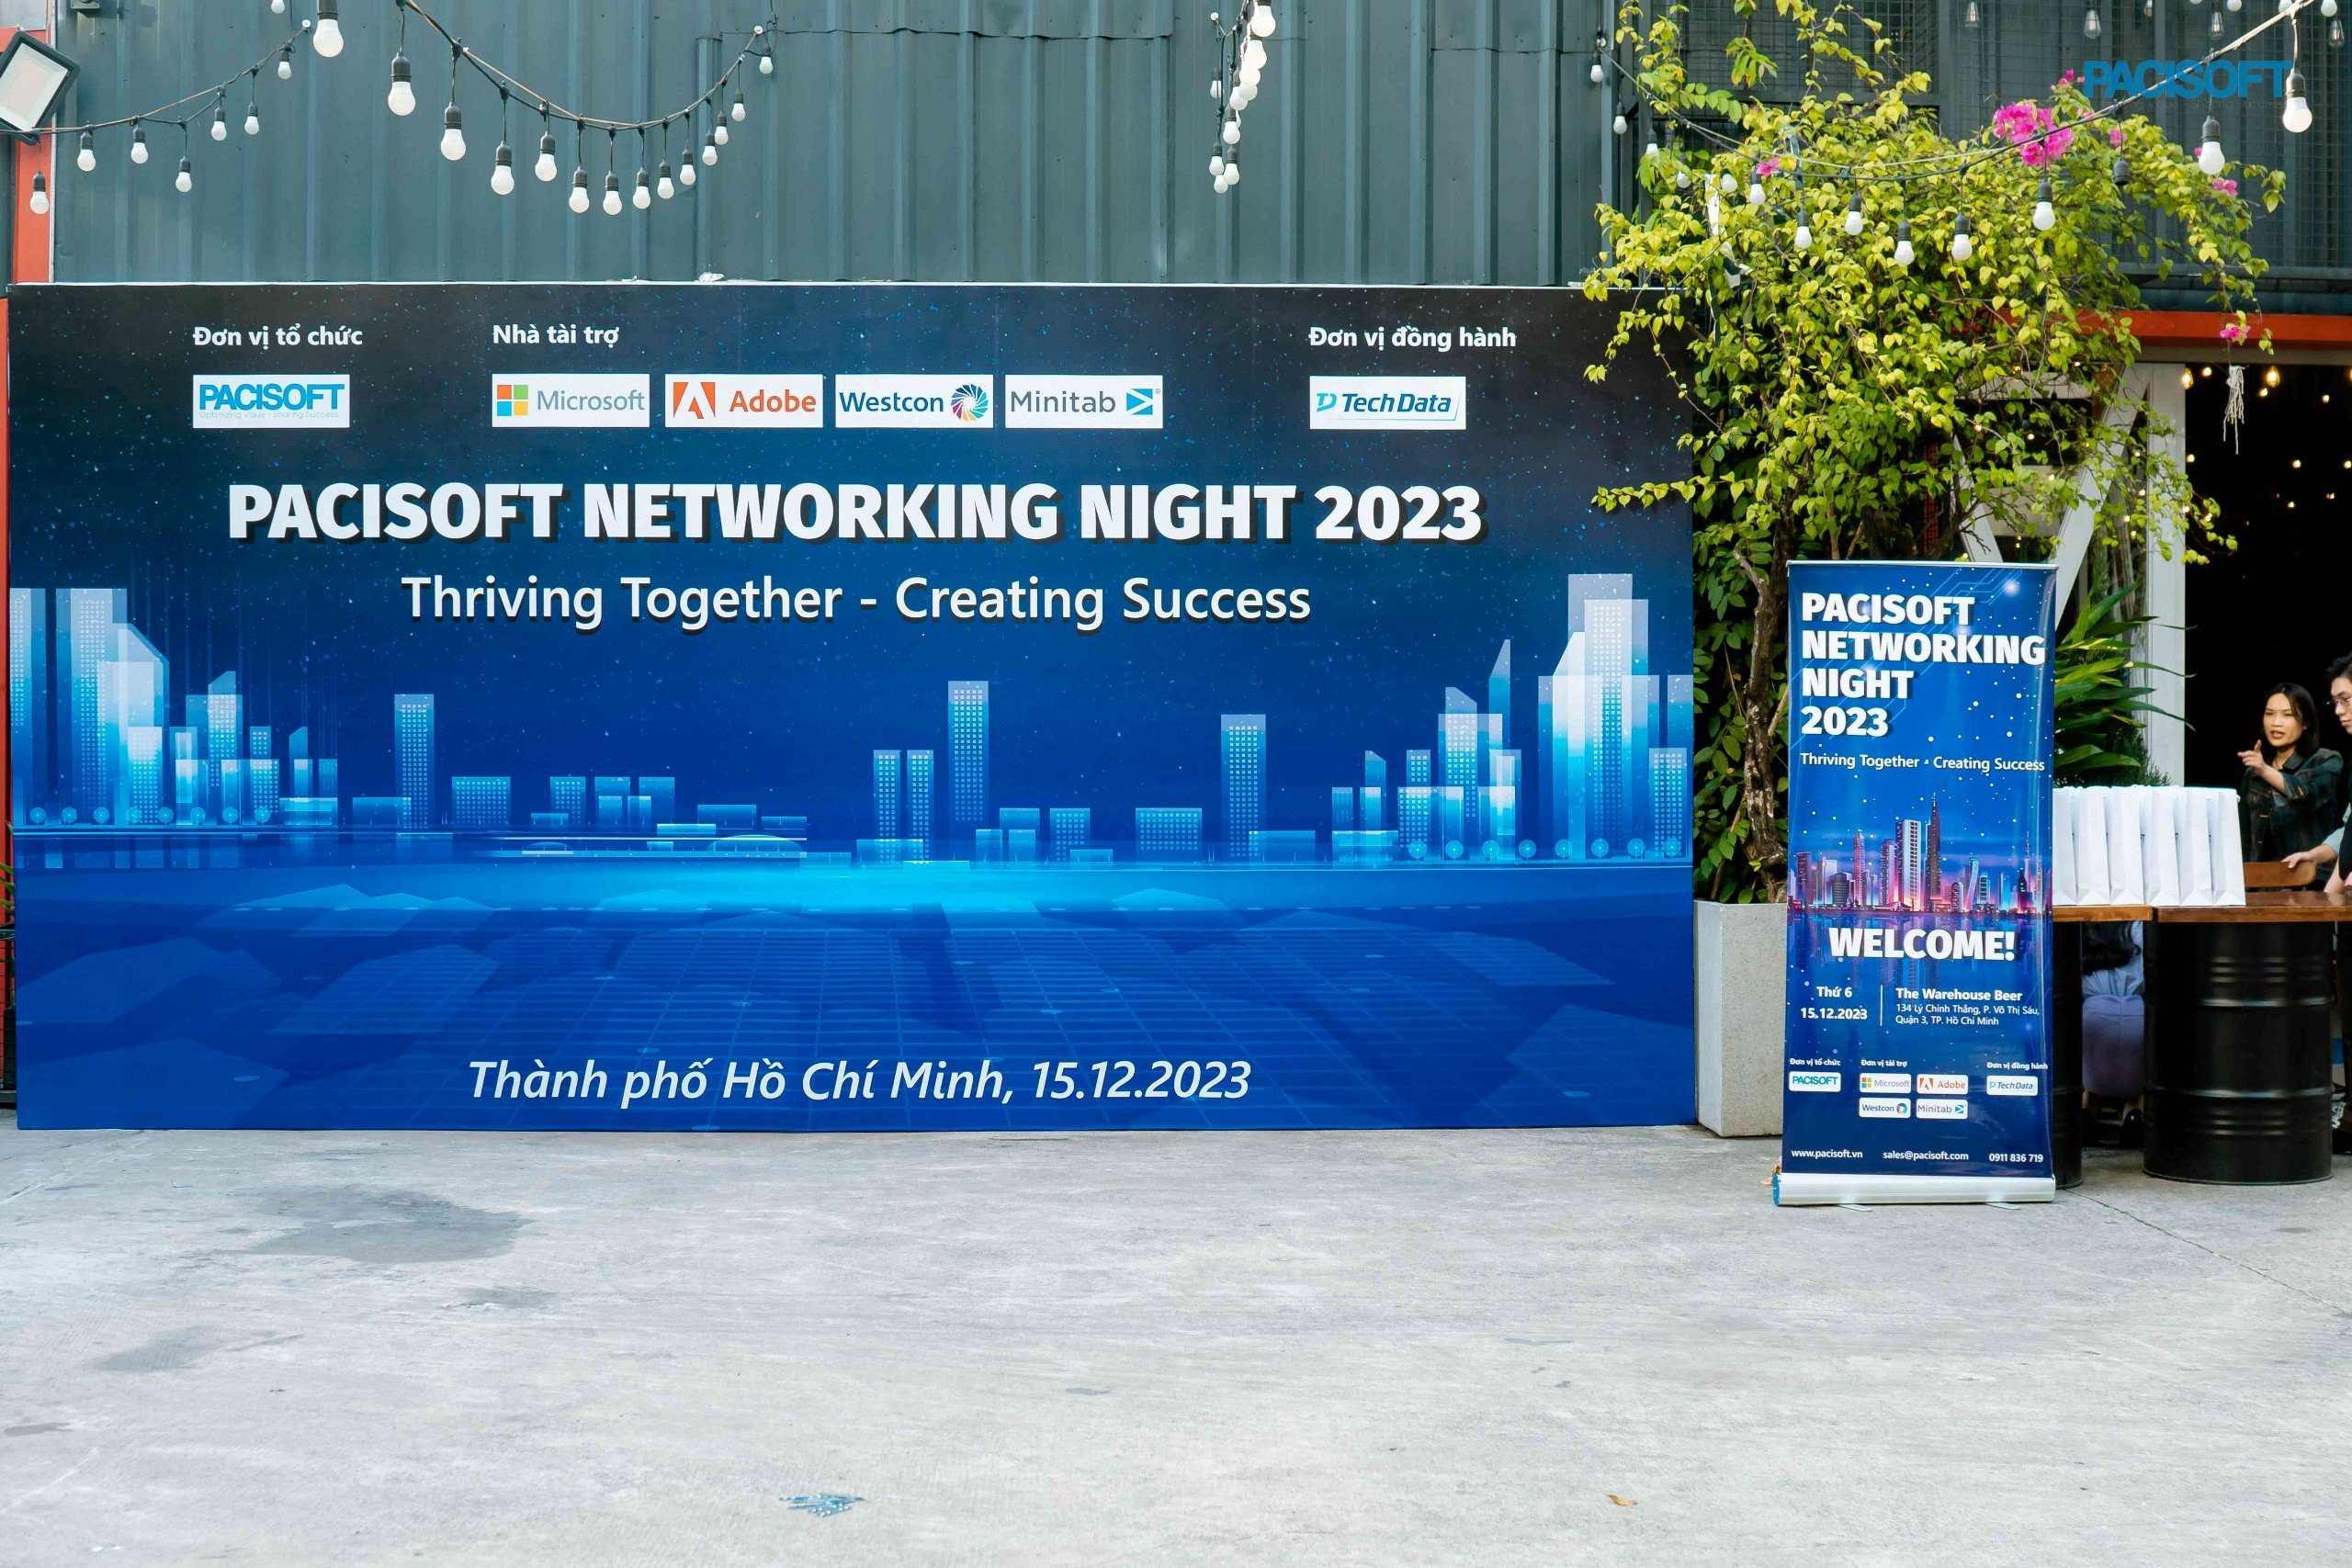 YEAR END PARTY - PACISOFT NEXTWORKING NIGHT 2023